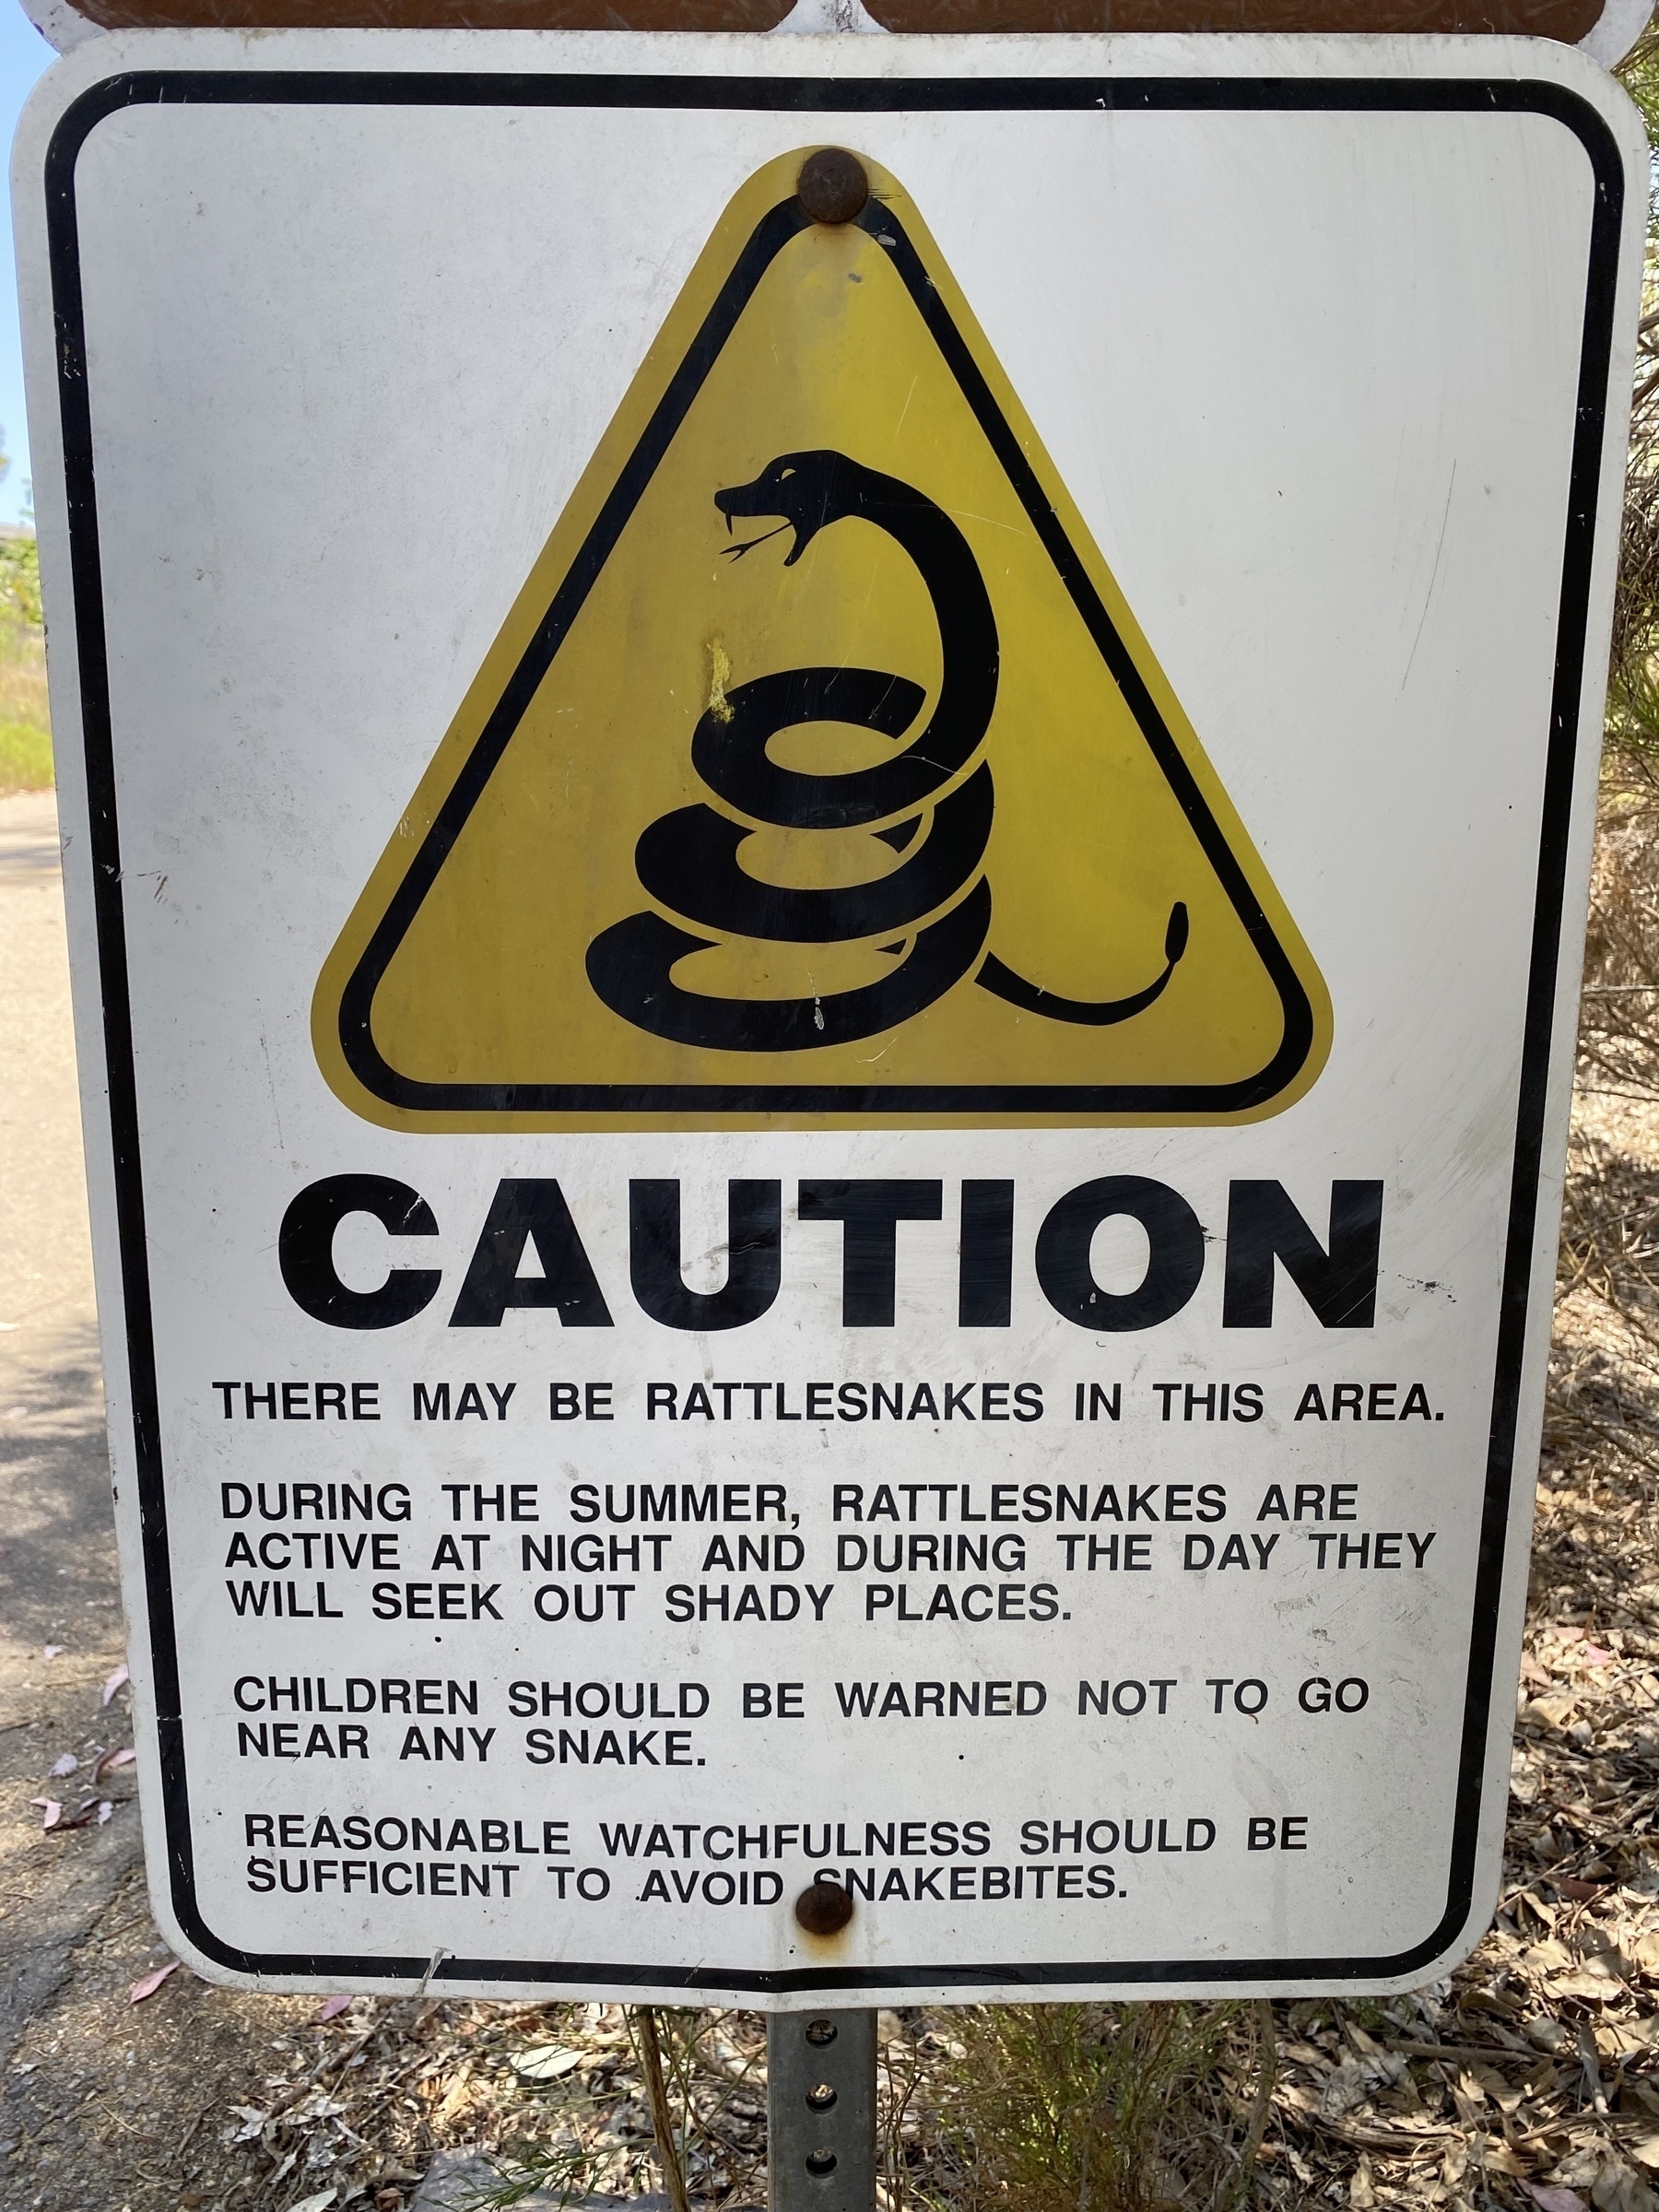 Caution sign warning that there may be rattlesnakes in the area.